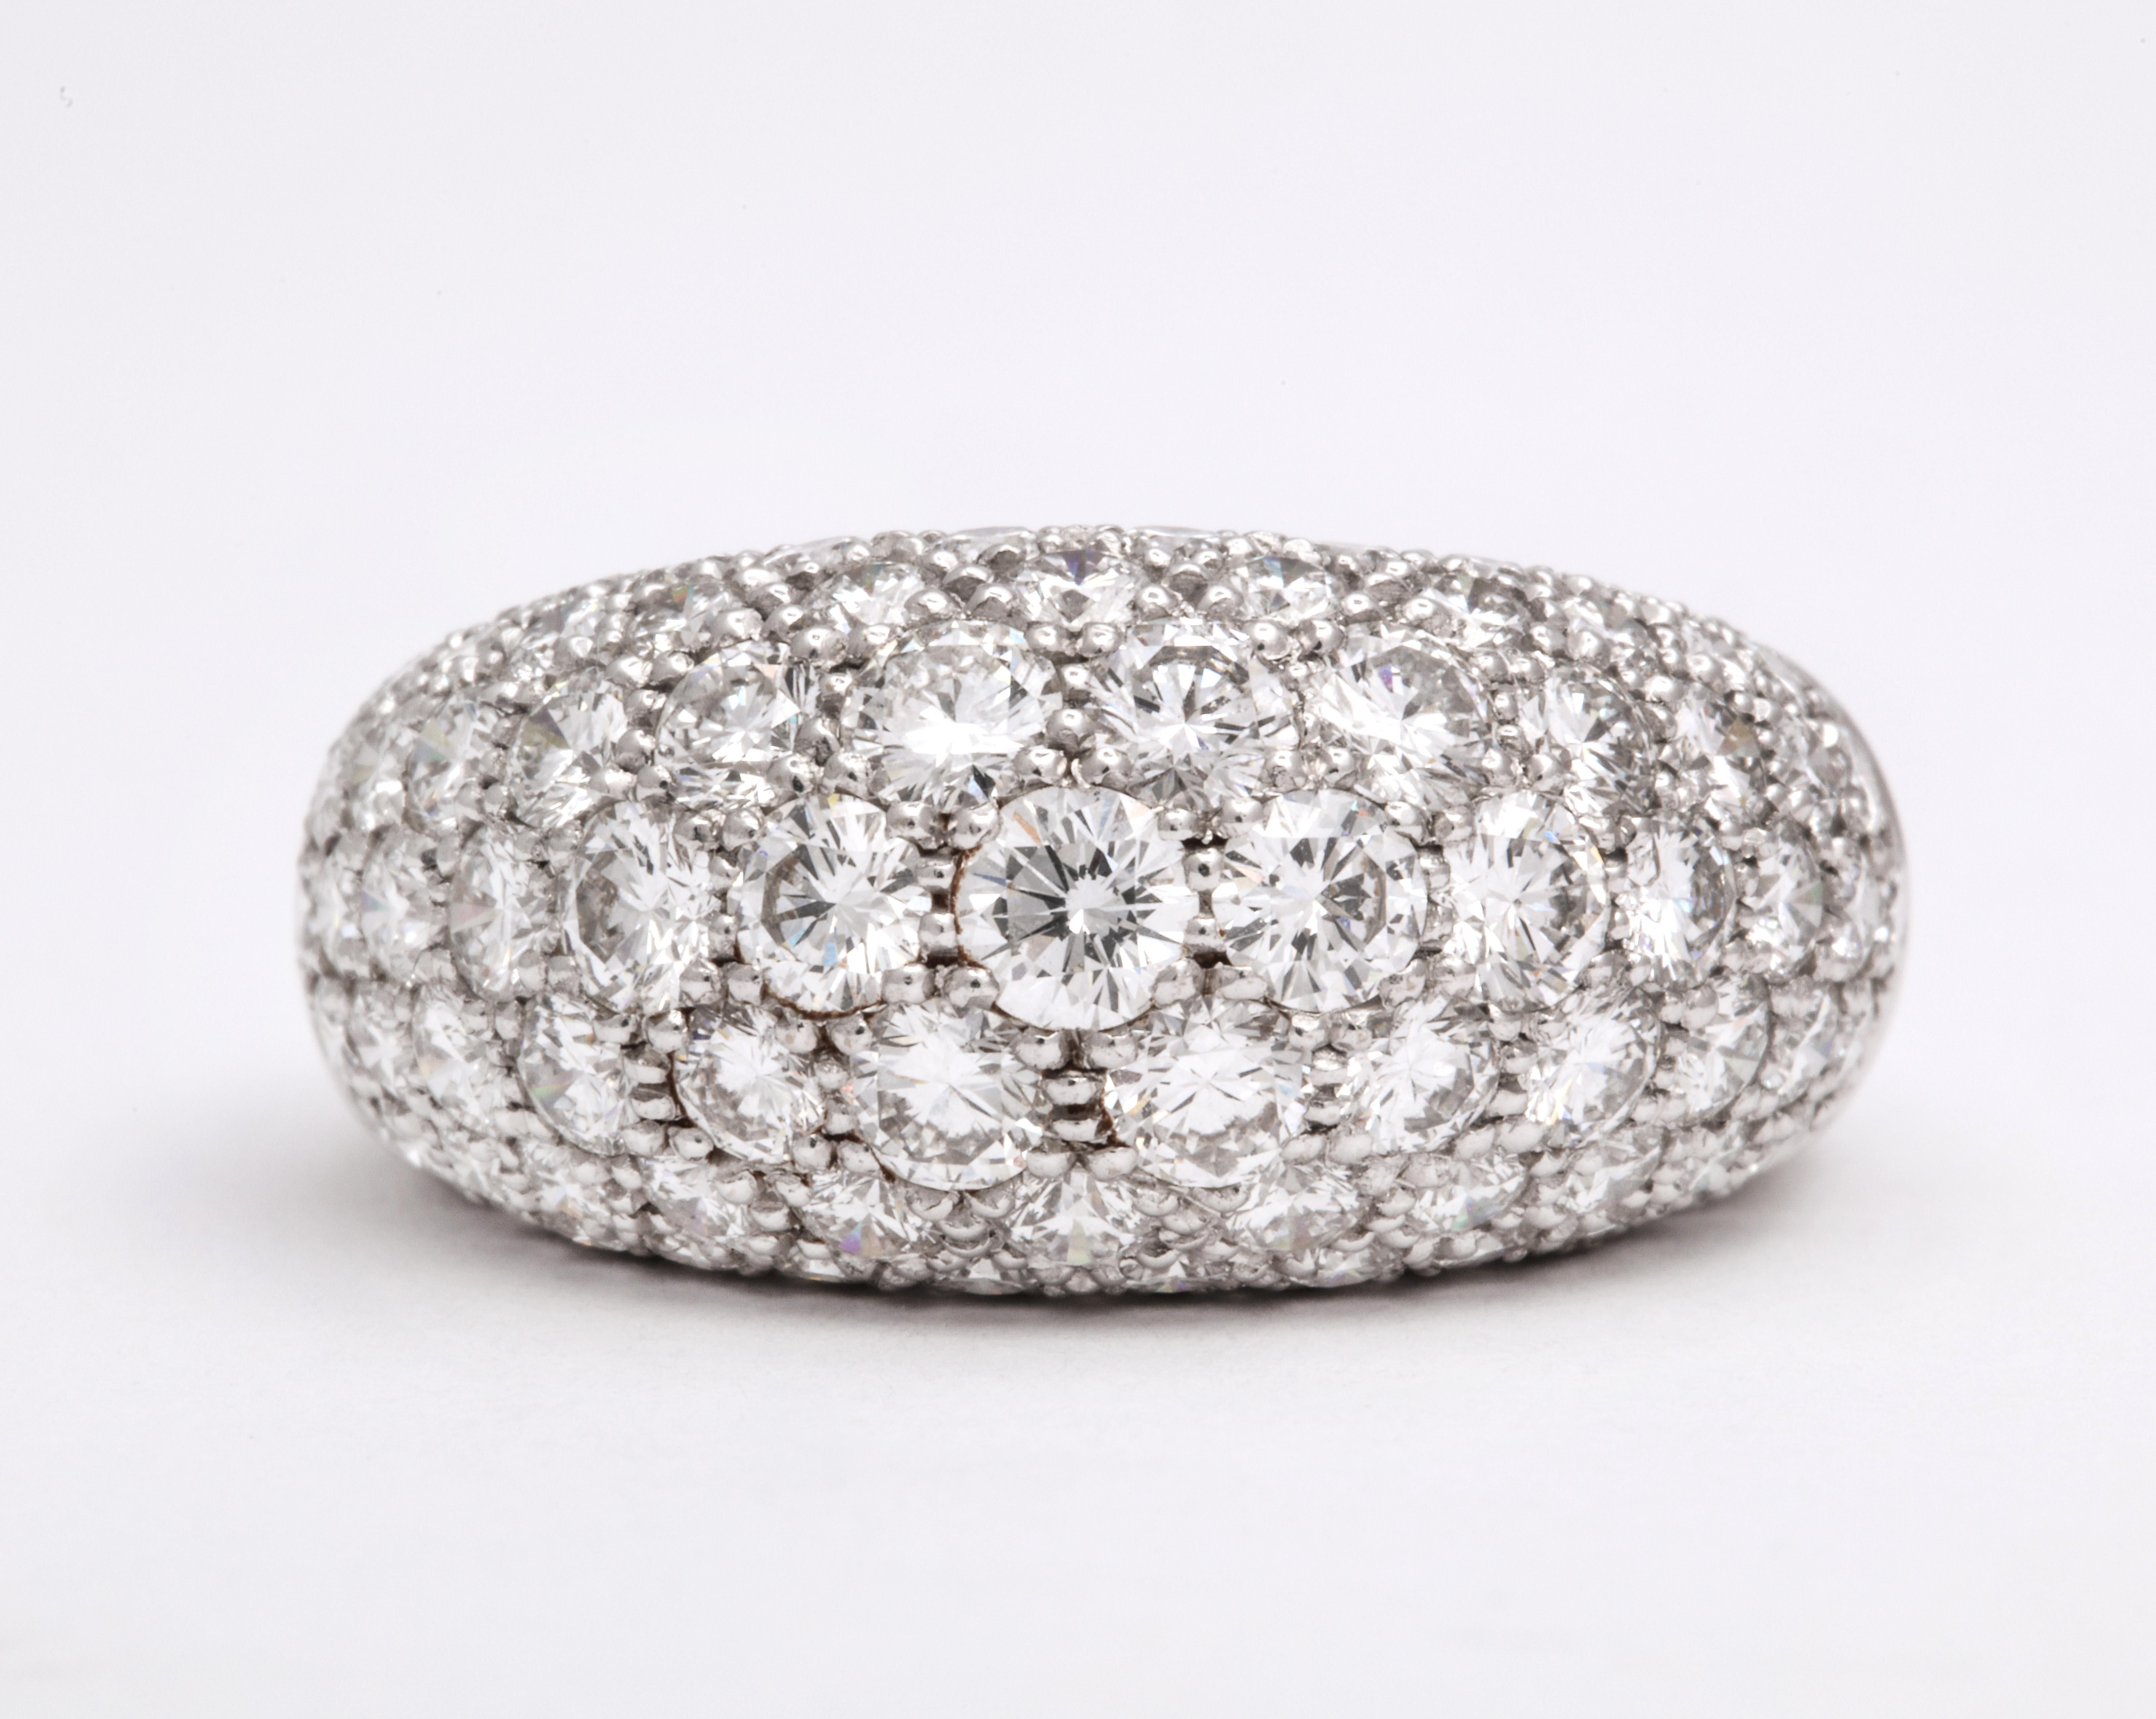 Van Cleef & Arpels Platinum Dome Ring with Diamonds In Good Condition For Sale In New York, NY